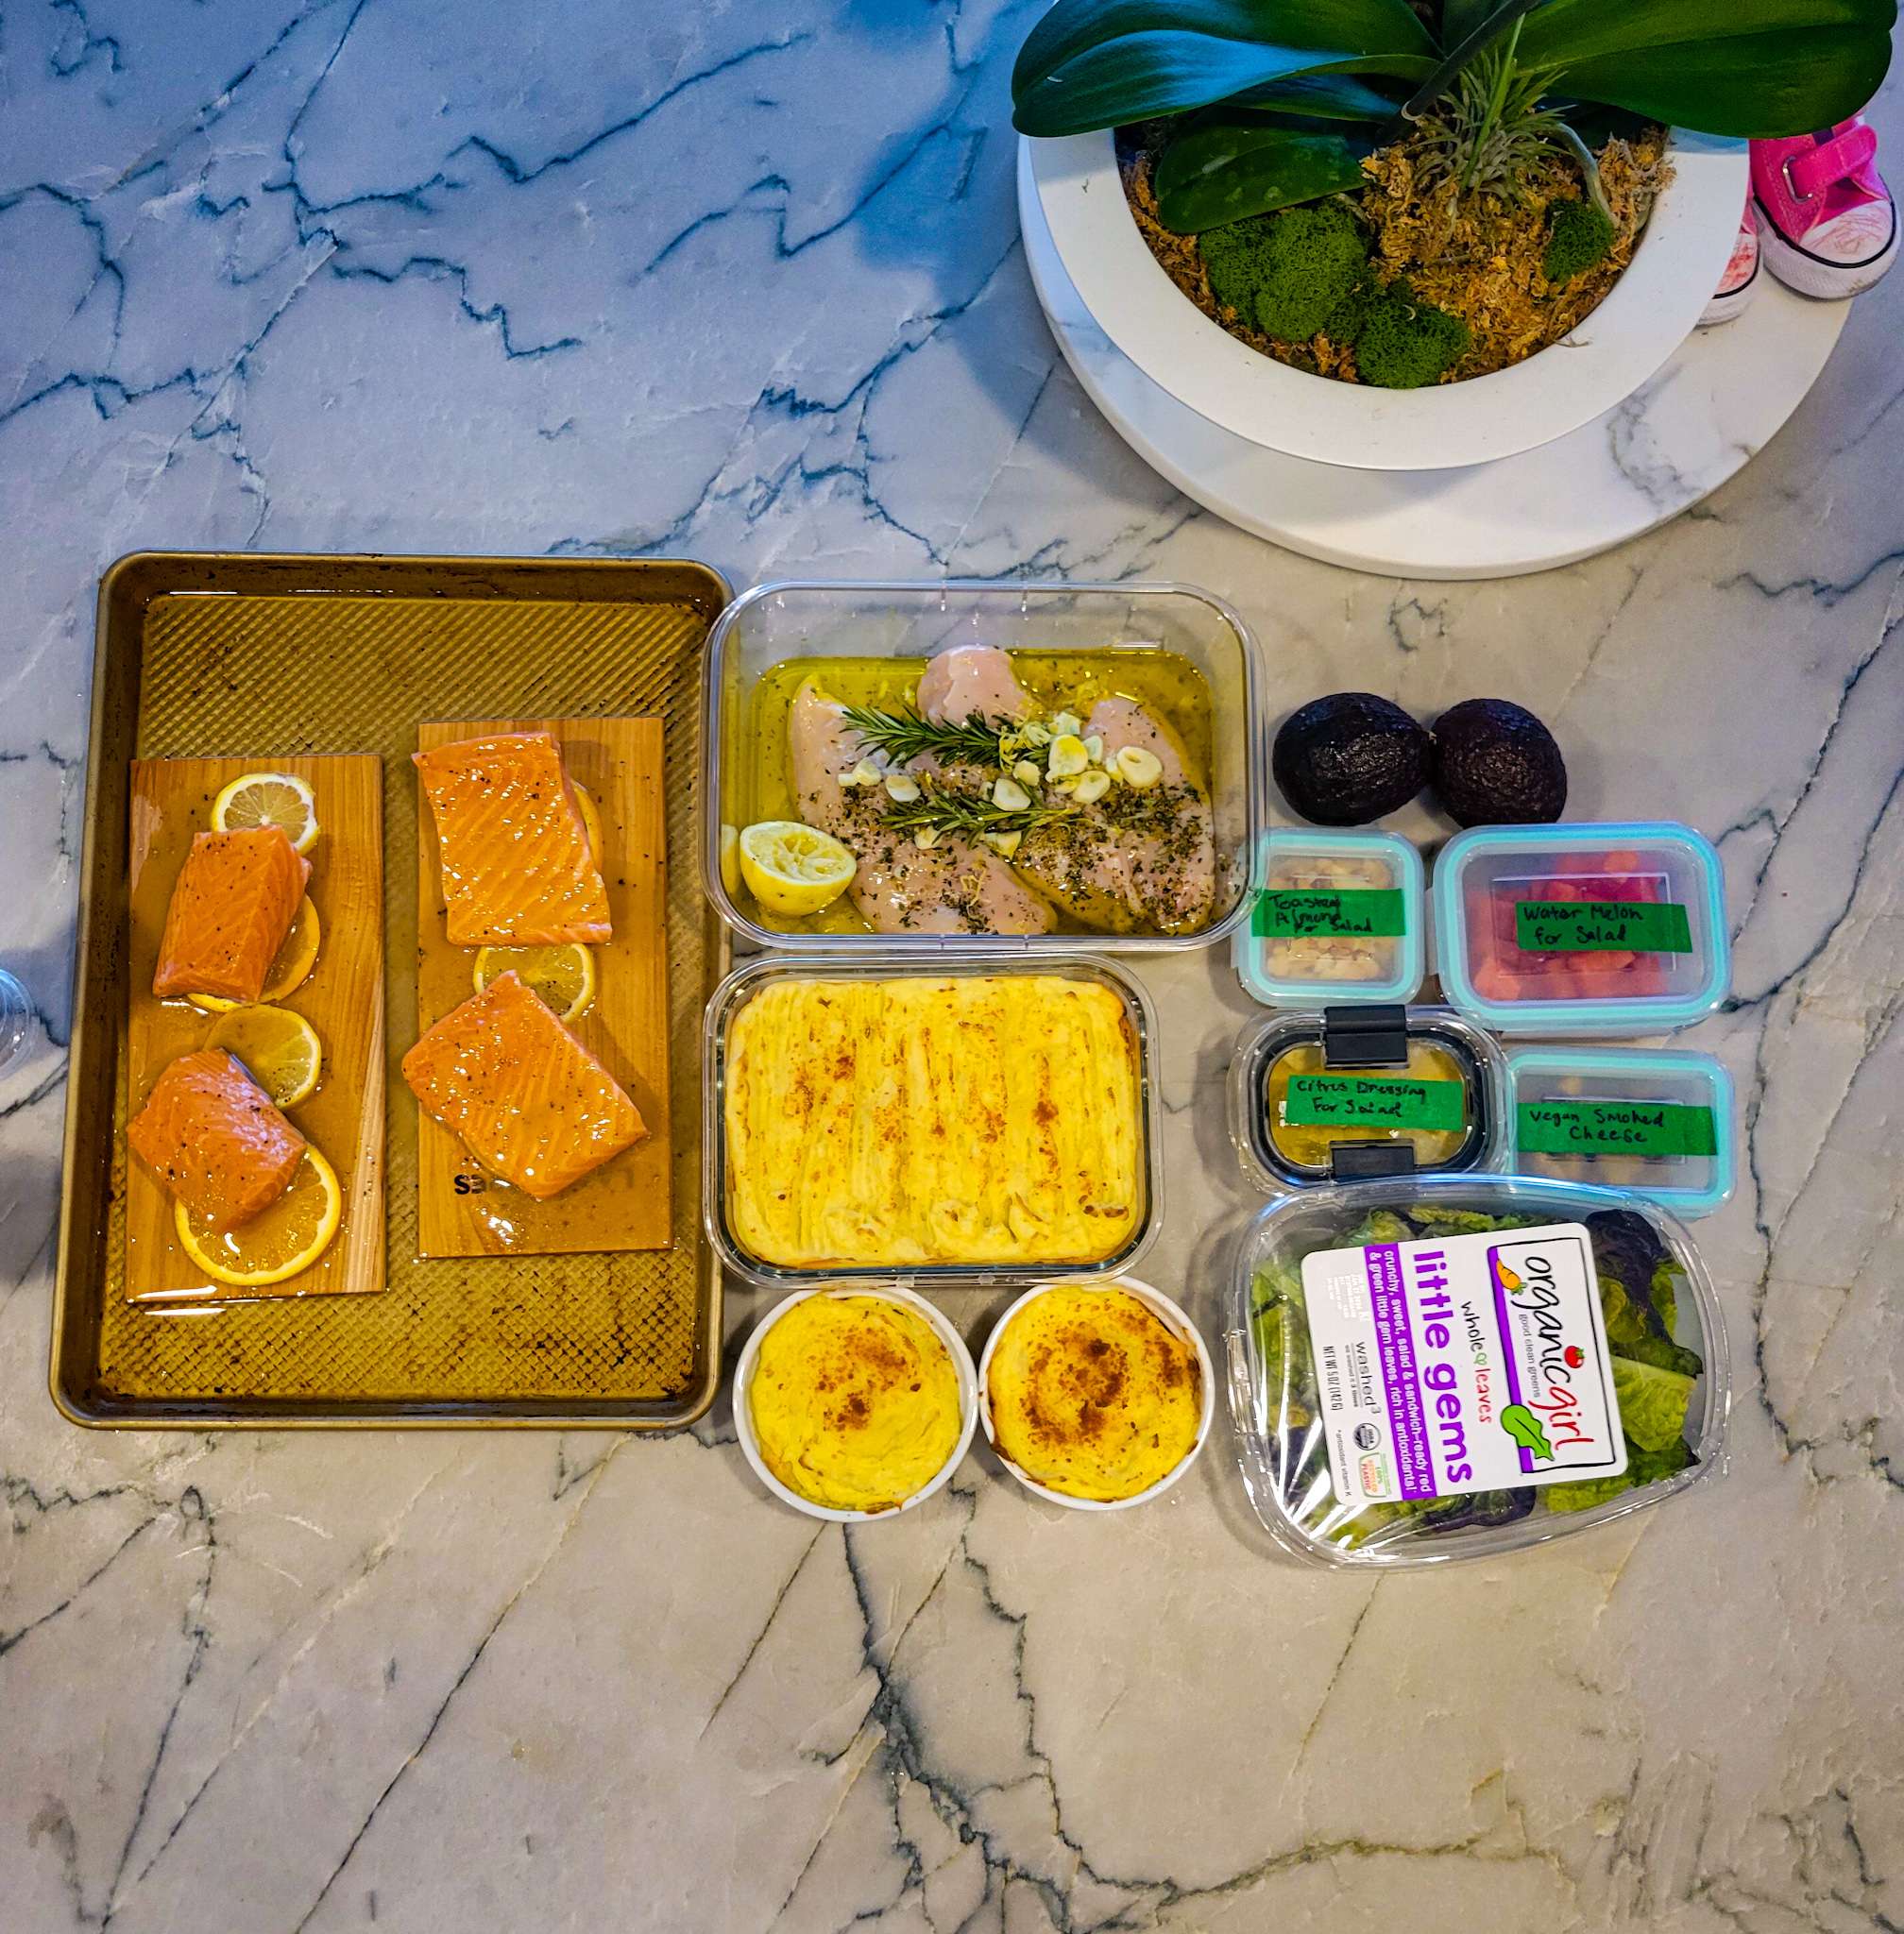 The Art of Meal Prep, Transformed Three Meals into a Weeks Worth of Meals